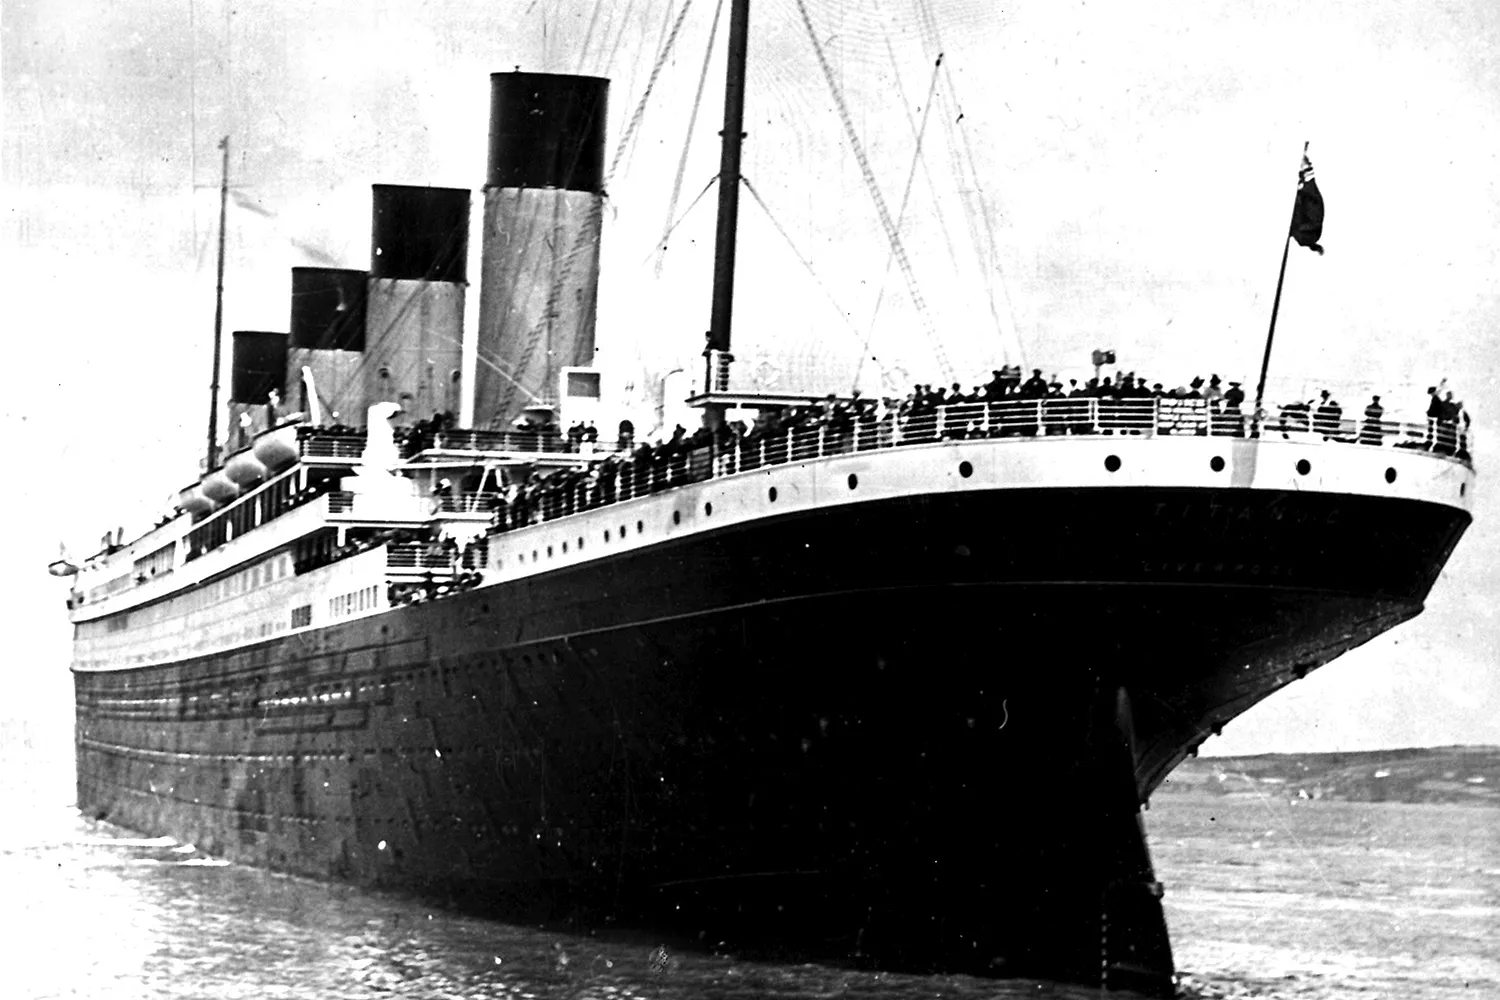 Eerie 'Titanic' Scene Goes Viral During Search for Missing Vessel 'Titan' 10